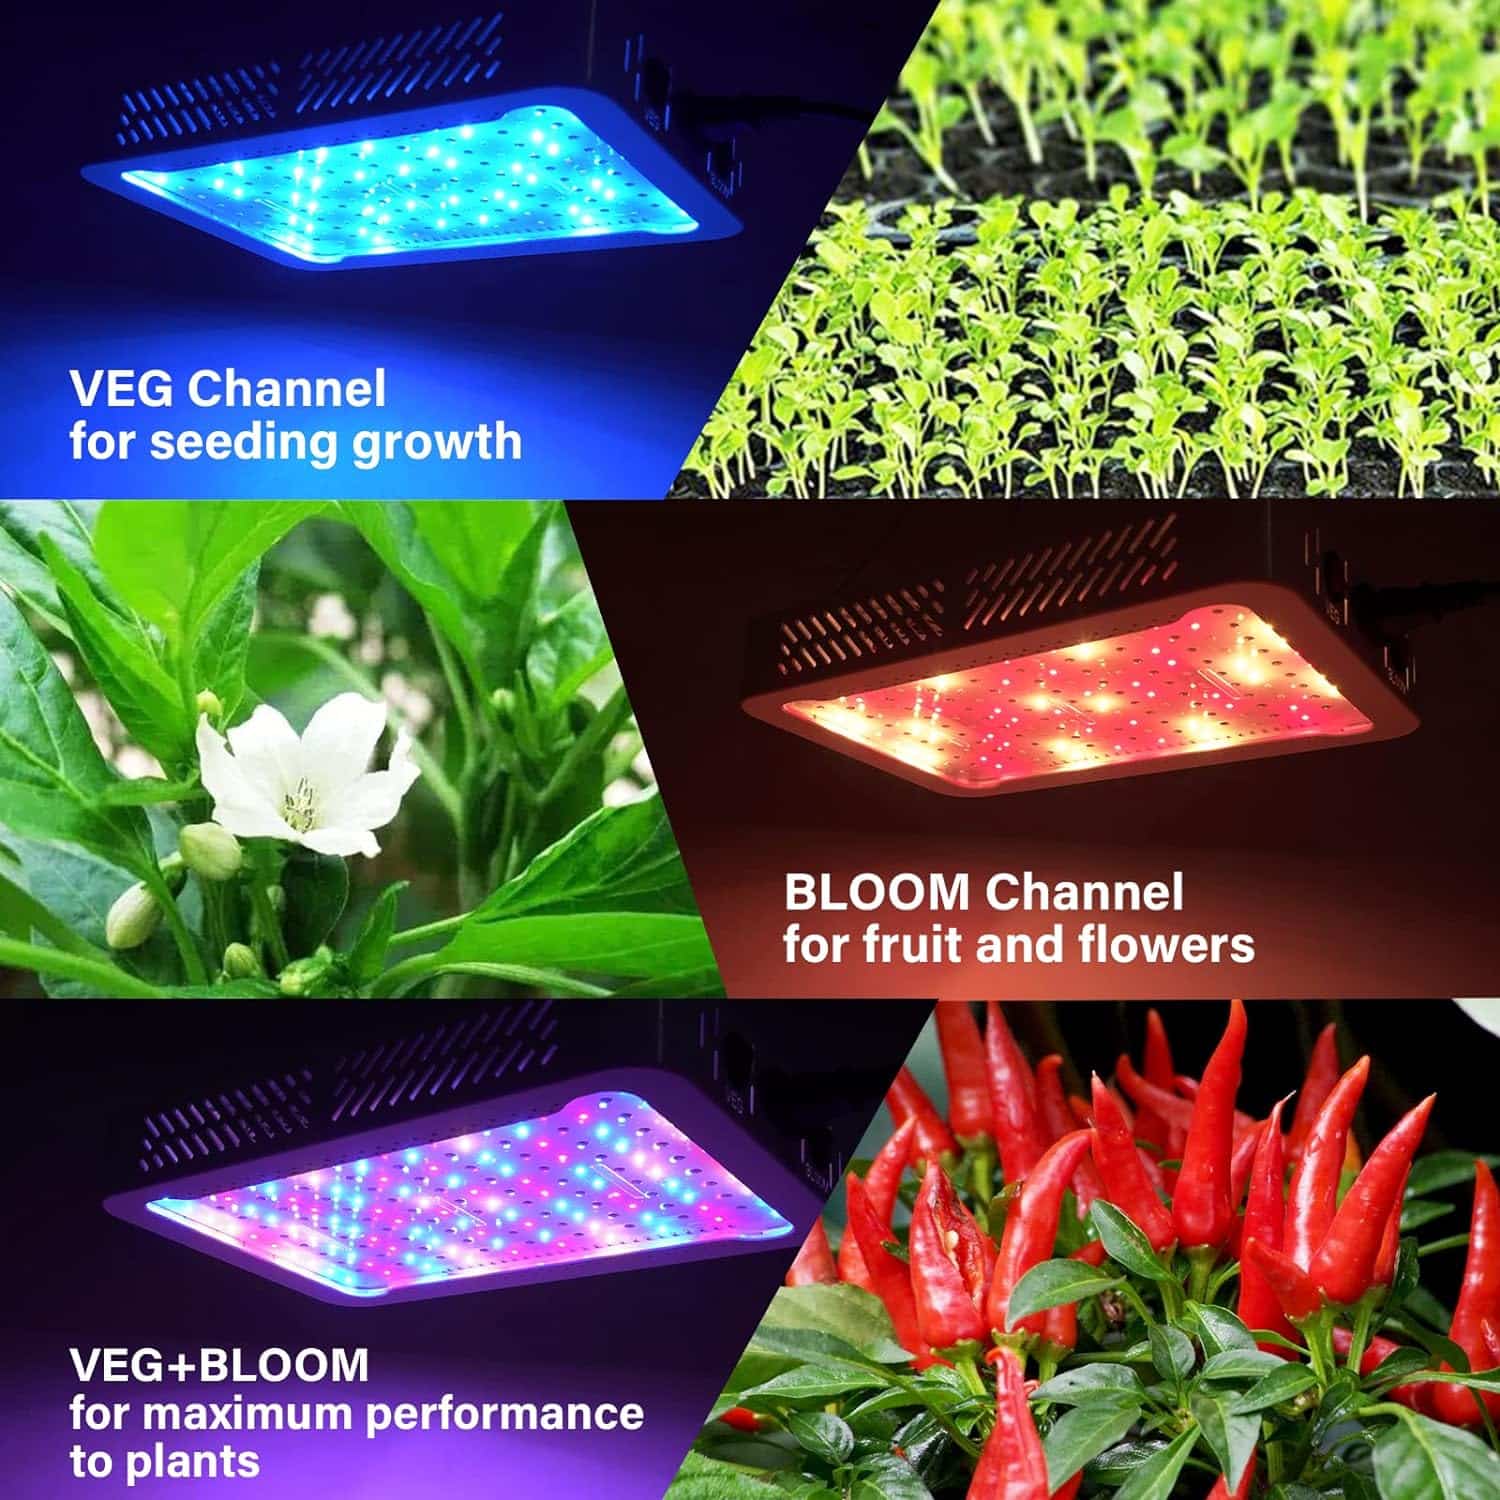 TATU 1000w LED Grow Light for Indoor Plants, Full Spectrum Plant Light Growing Lamp for Hydroponic Indoor Plant Veg and Flower for Grow Tent (Actual Power 100W=1000W HPS)